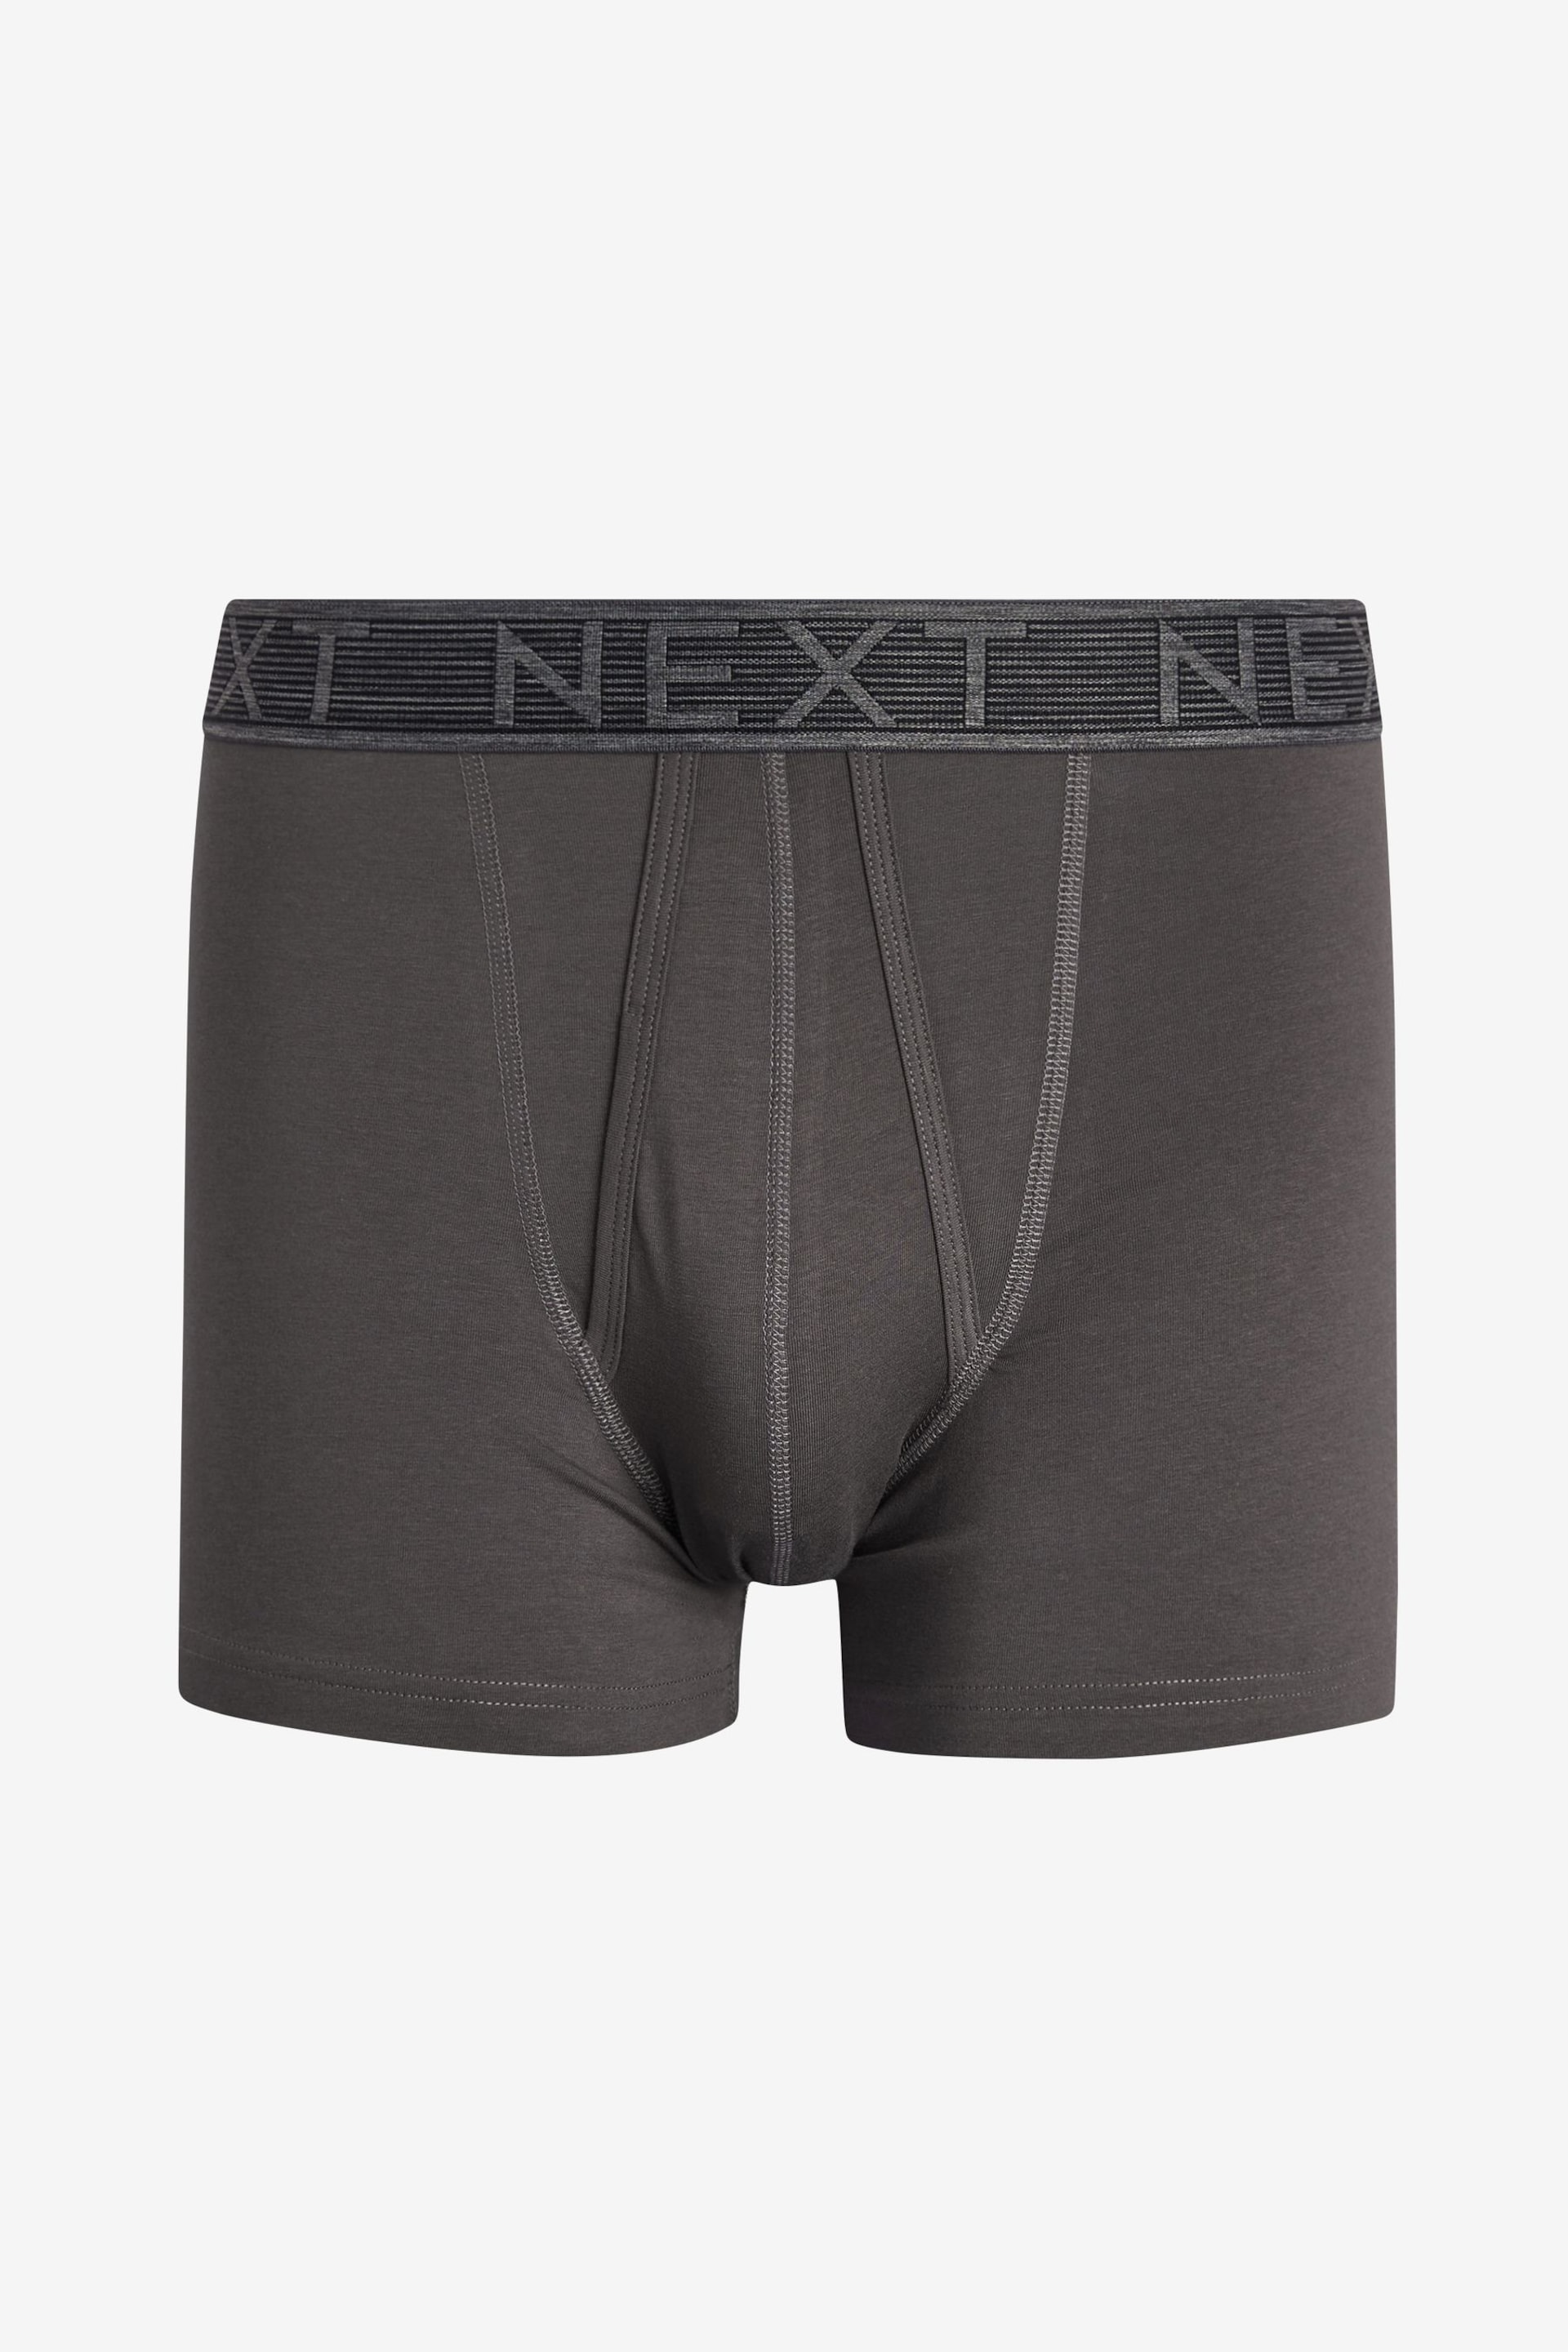 Grey 4 pack A-Front Boxers - Image 3 of 7